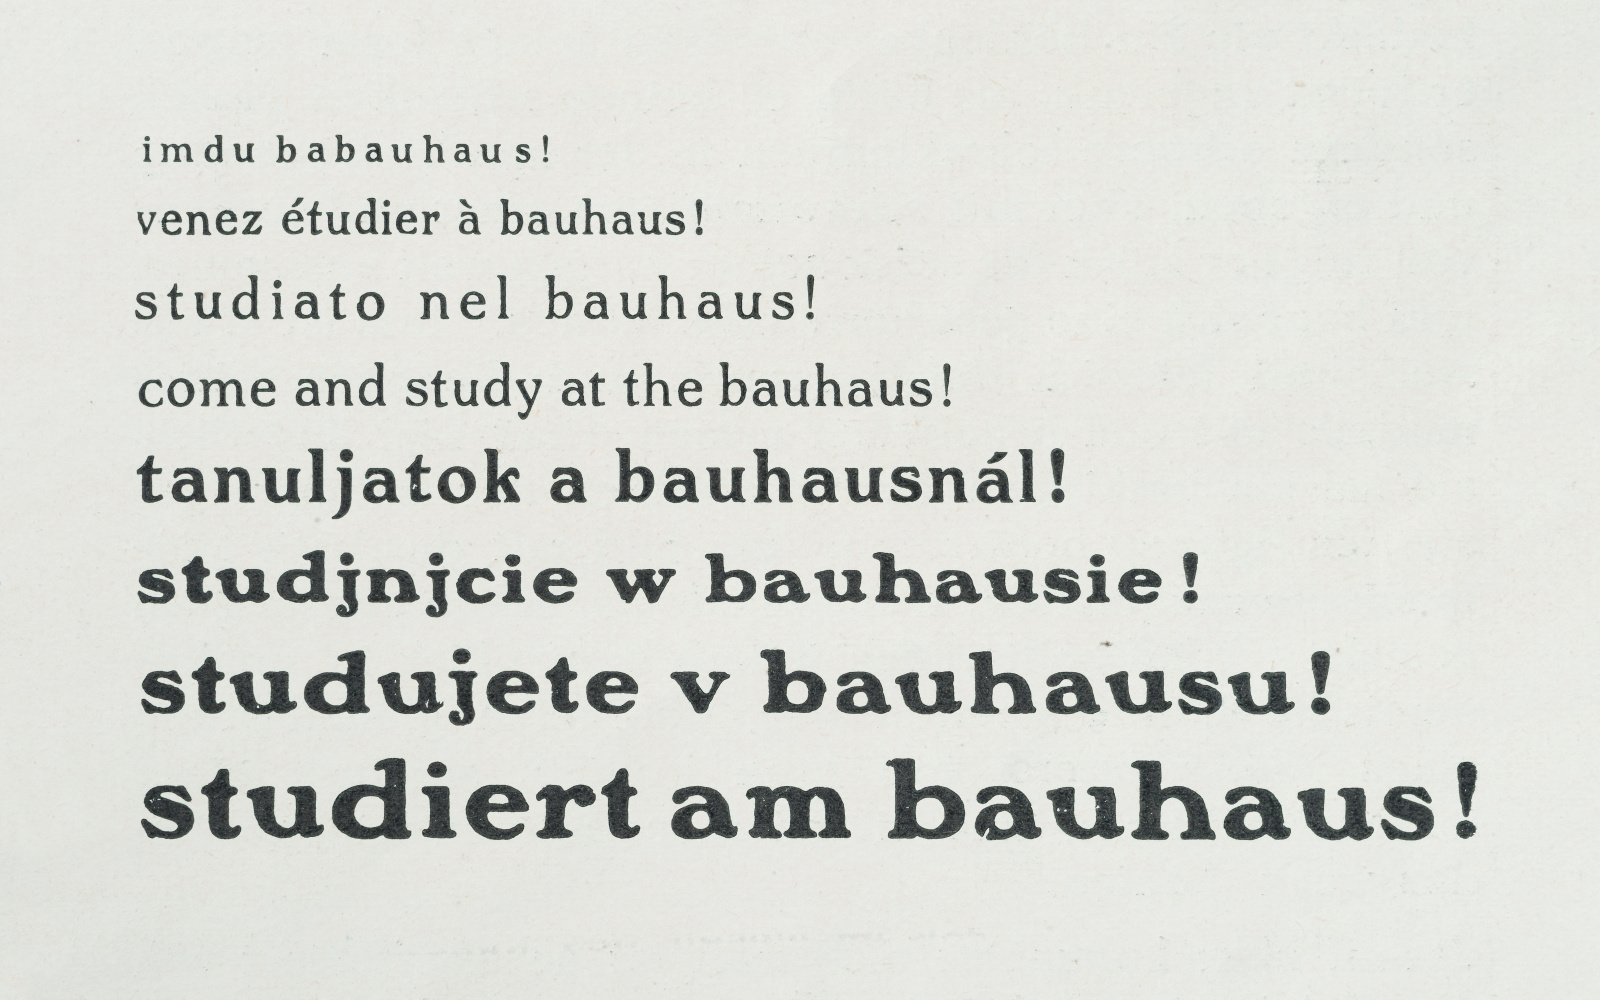 An ever-increasing lettering in various languages encourages students to study at the Bauhaus.